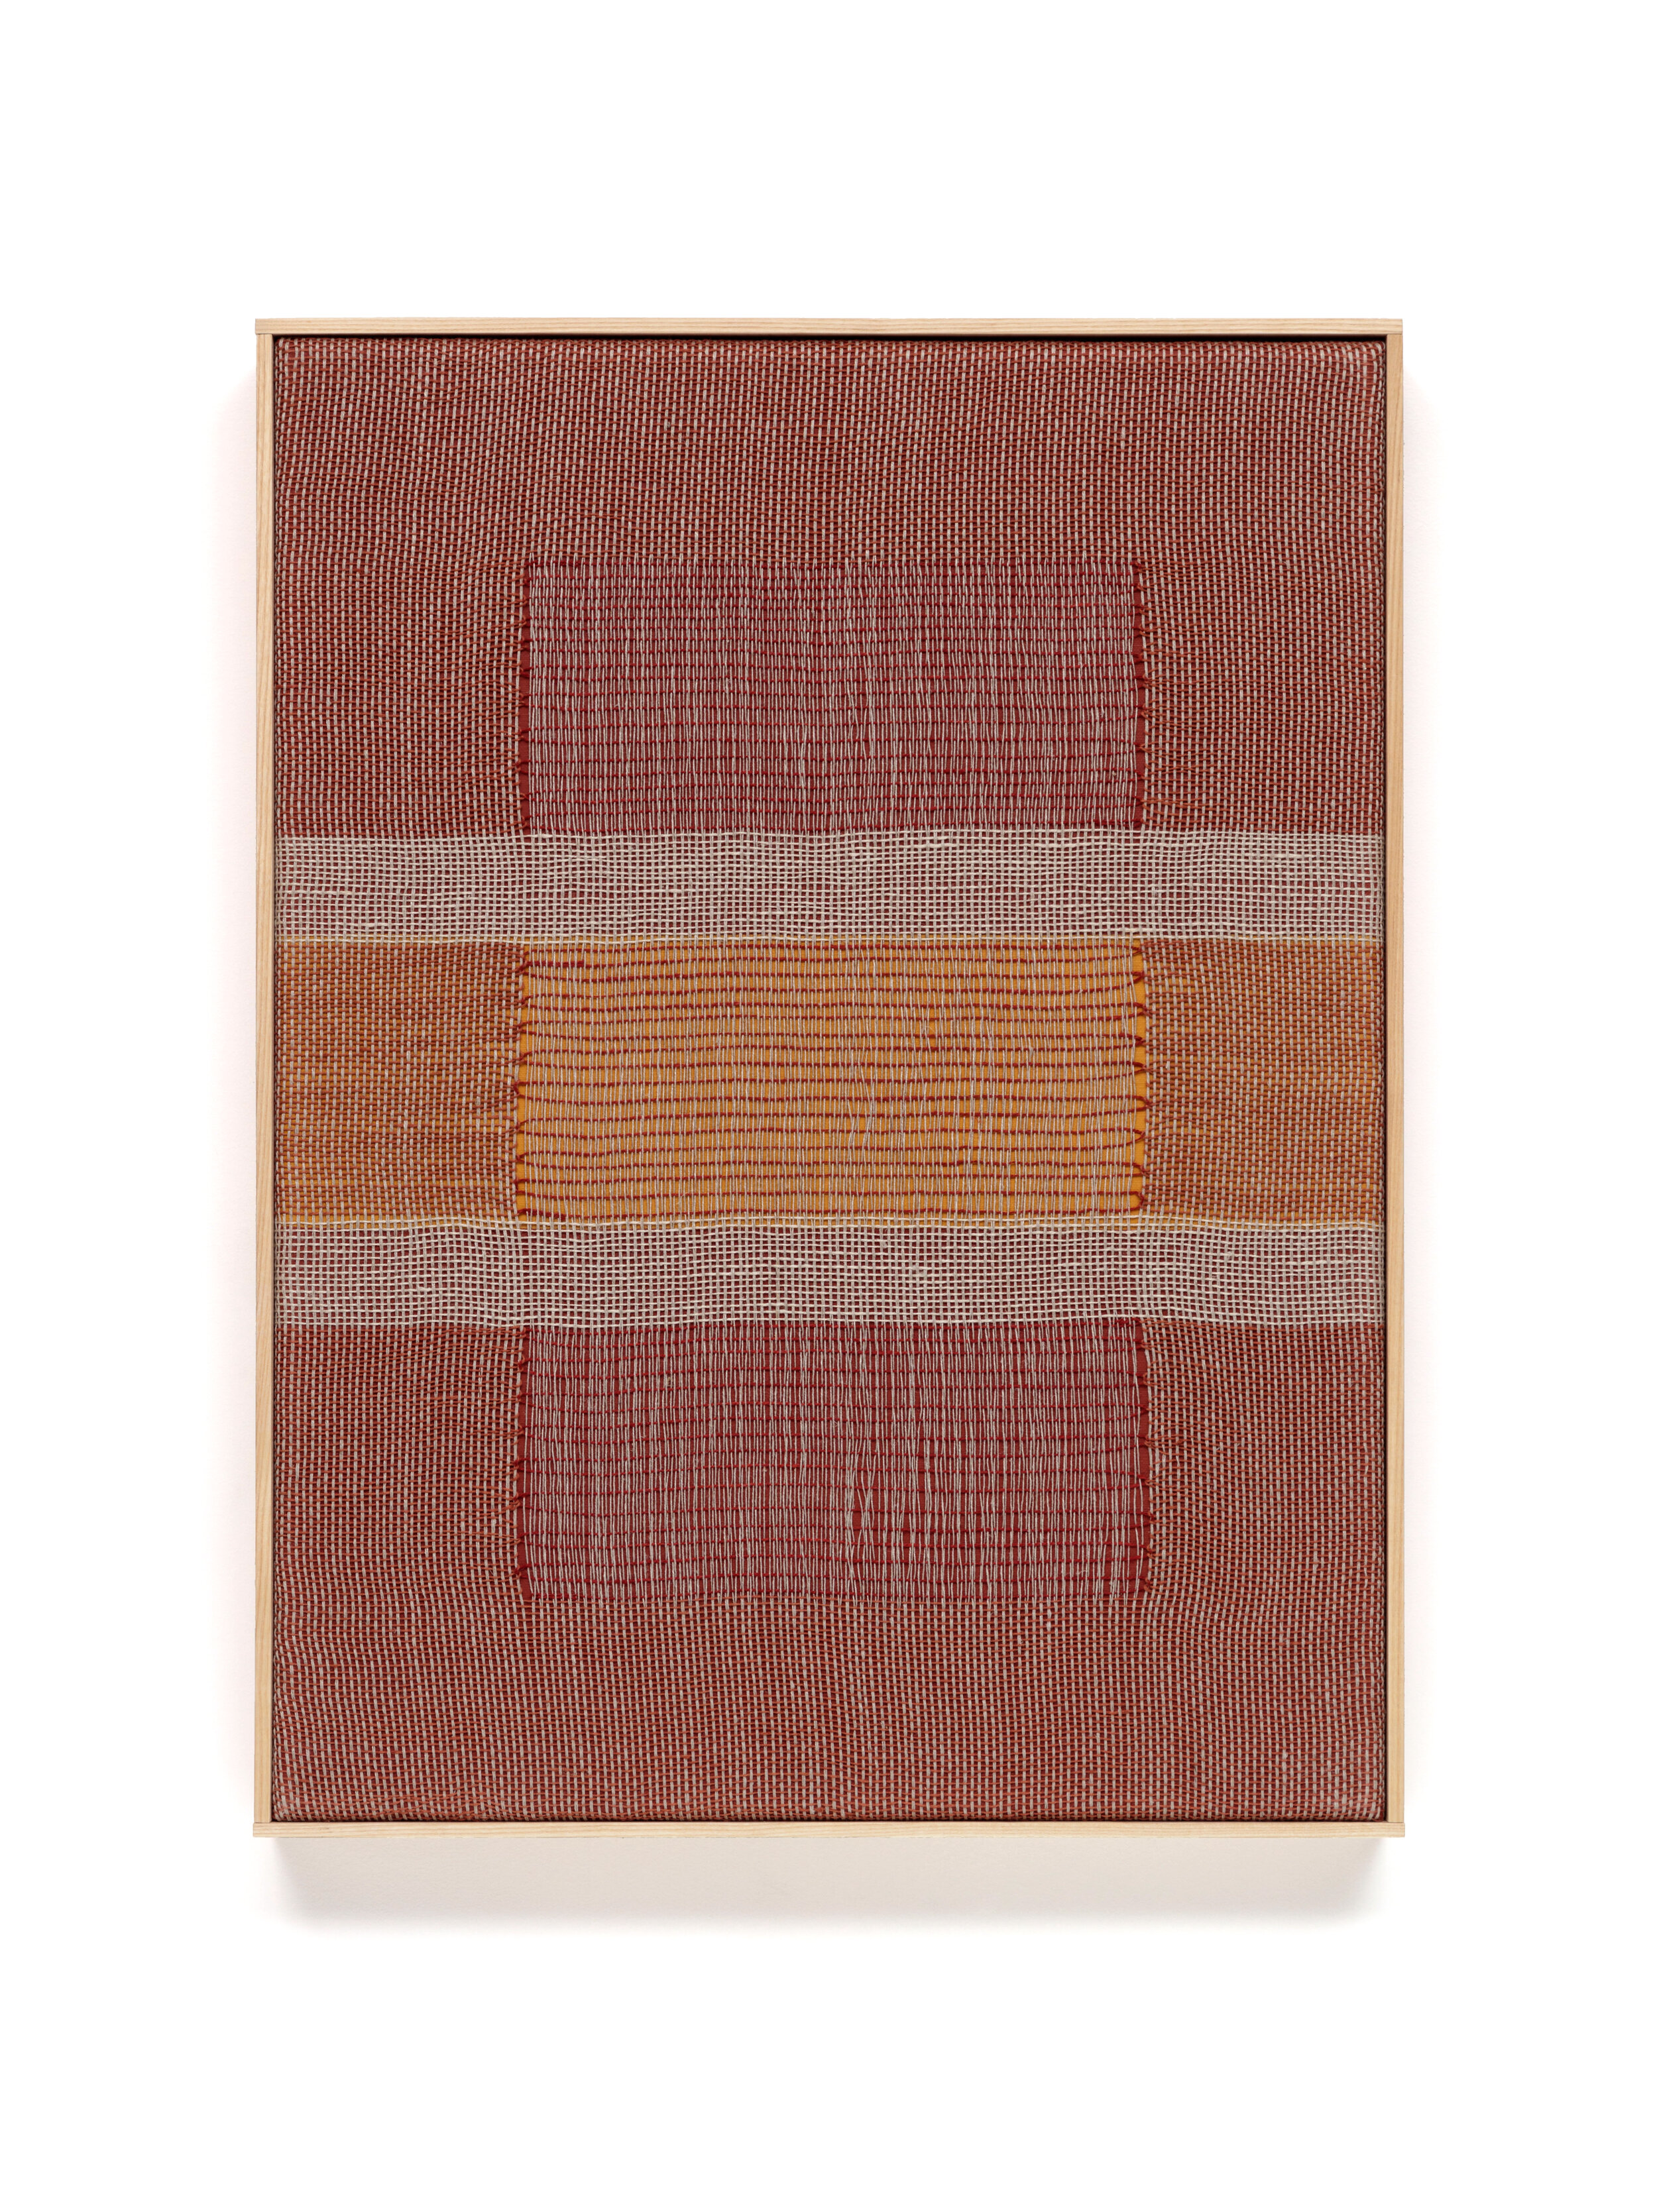 Madder Osage Open / 18” x 24” /2020 / linen, natural dyes, acrylic